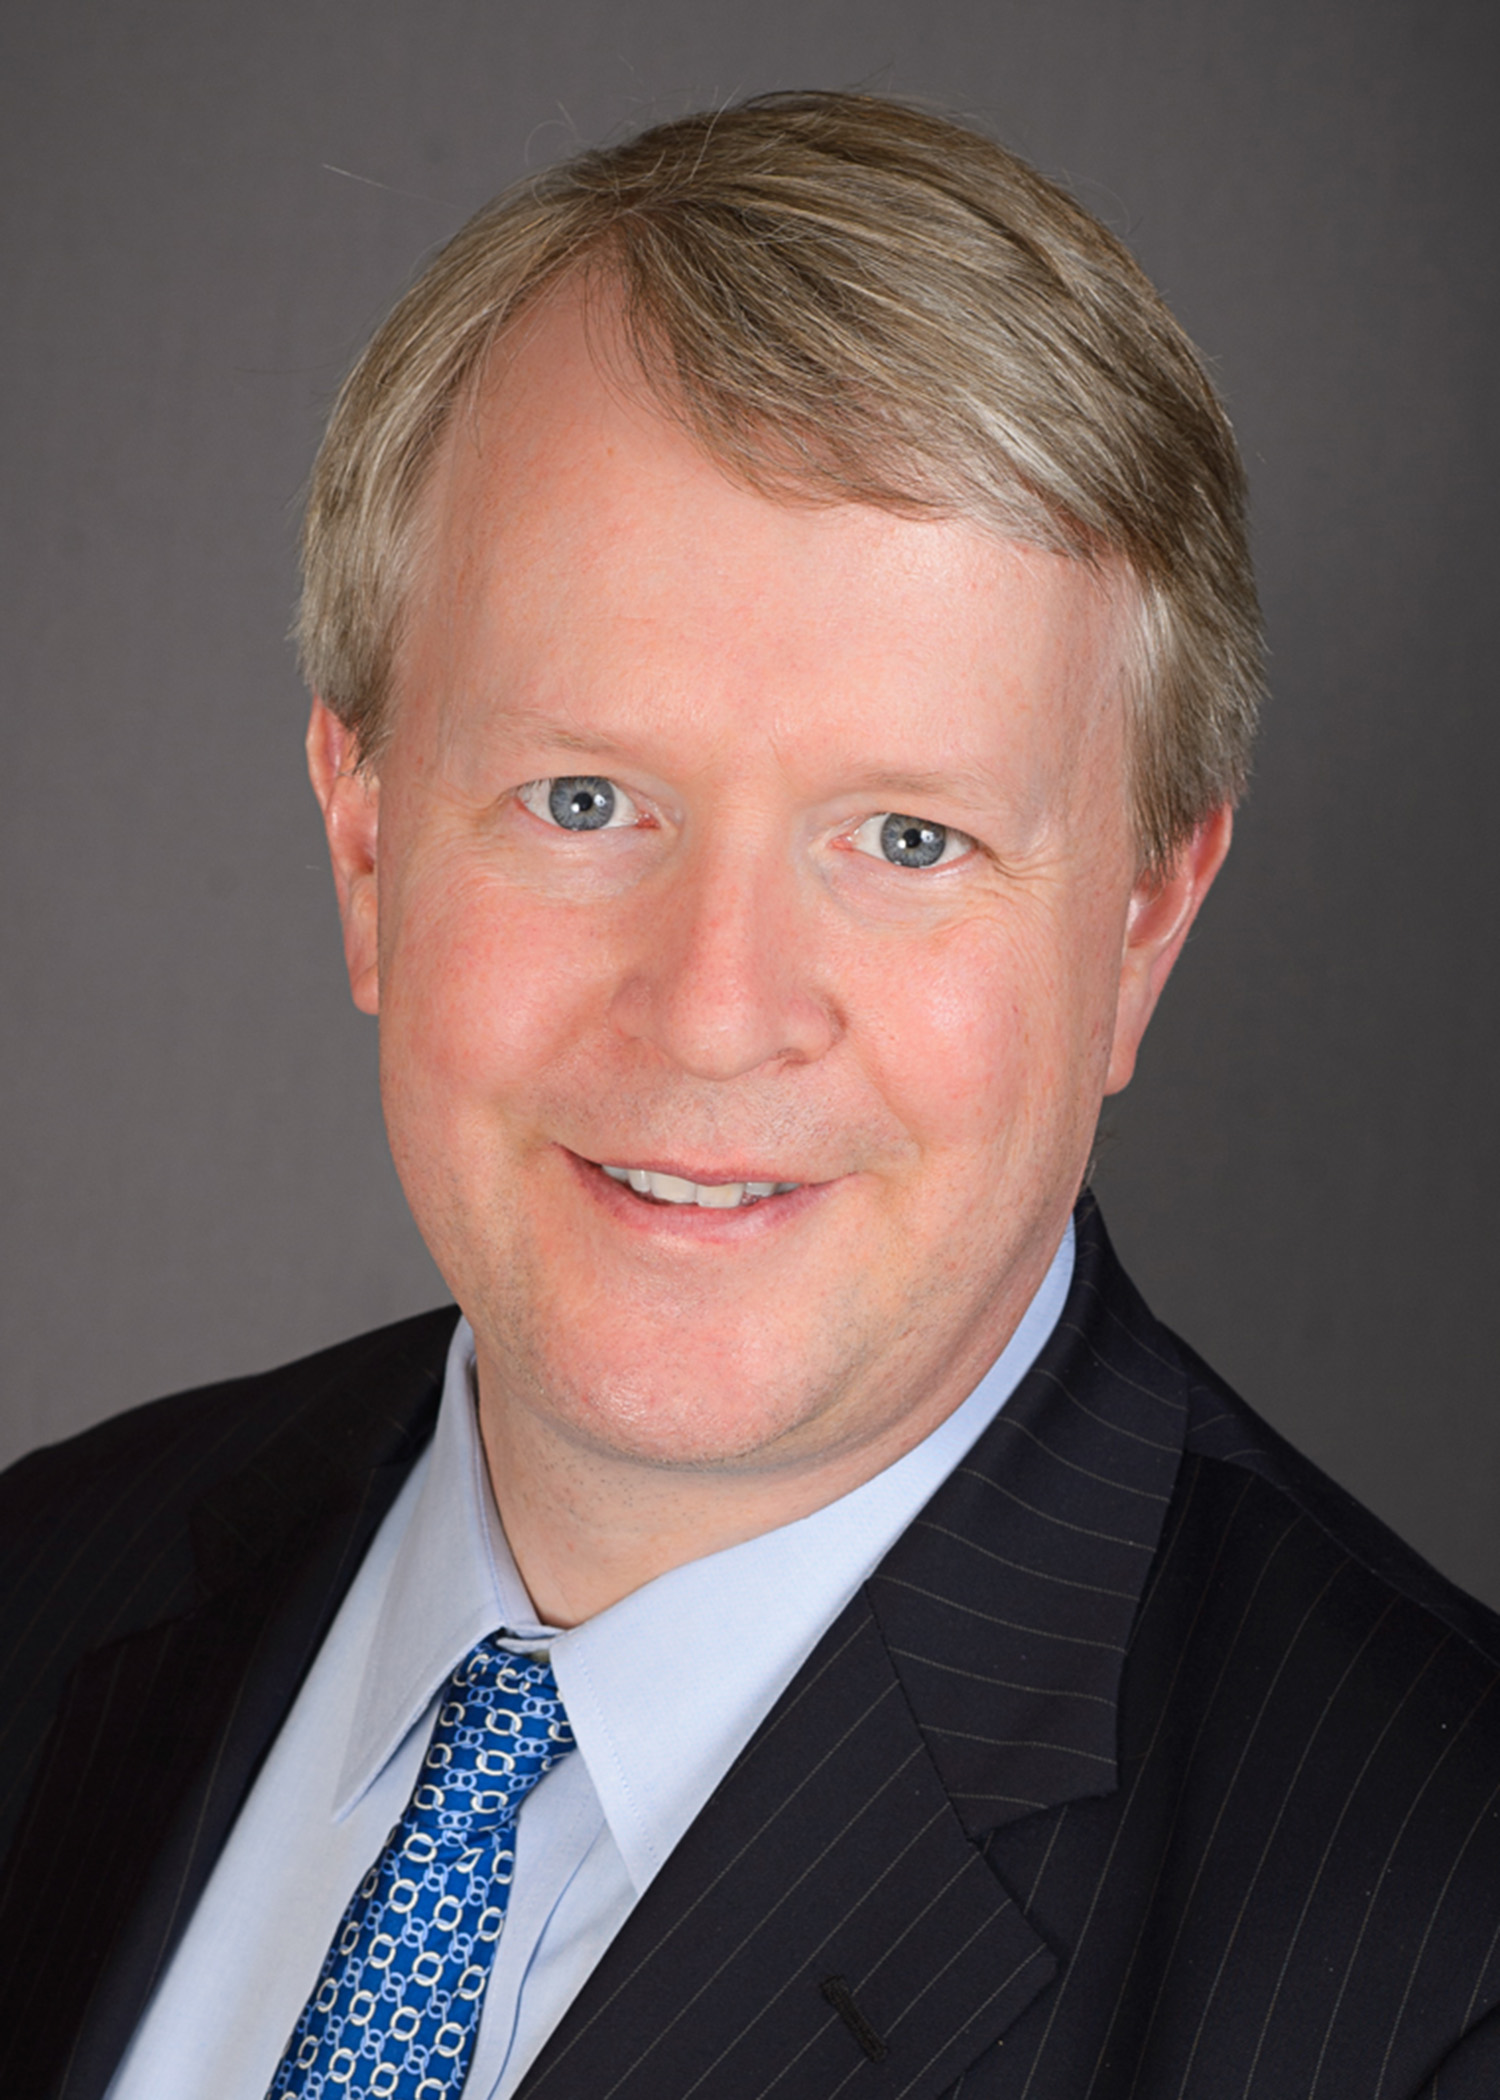 David Ely was hired as senior portfolio manager in Wilmington Trust's Boston office.